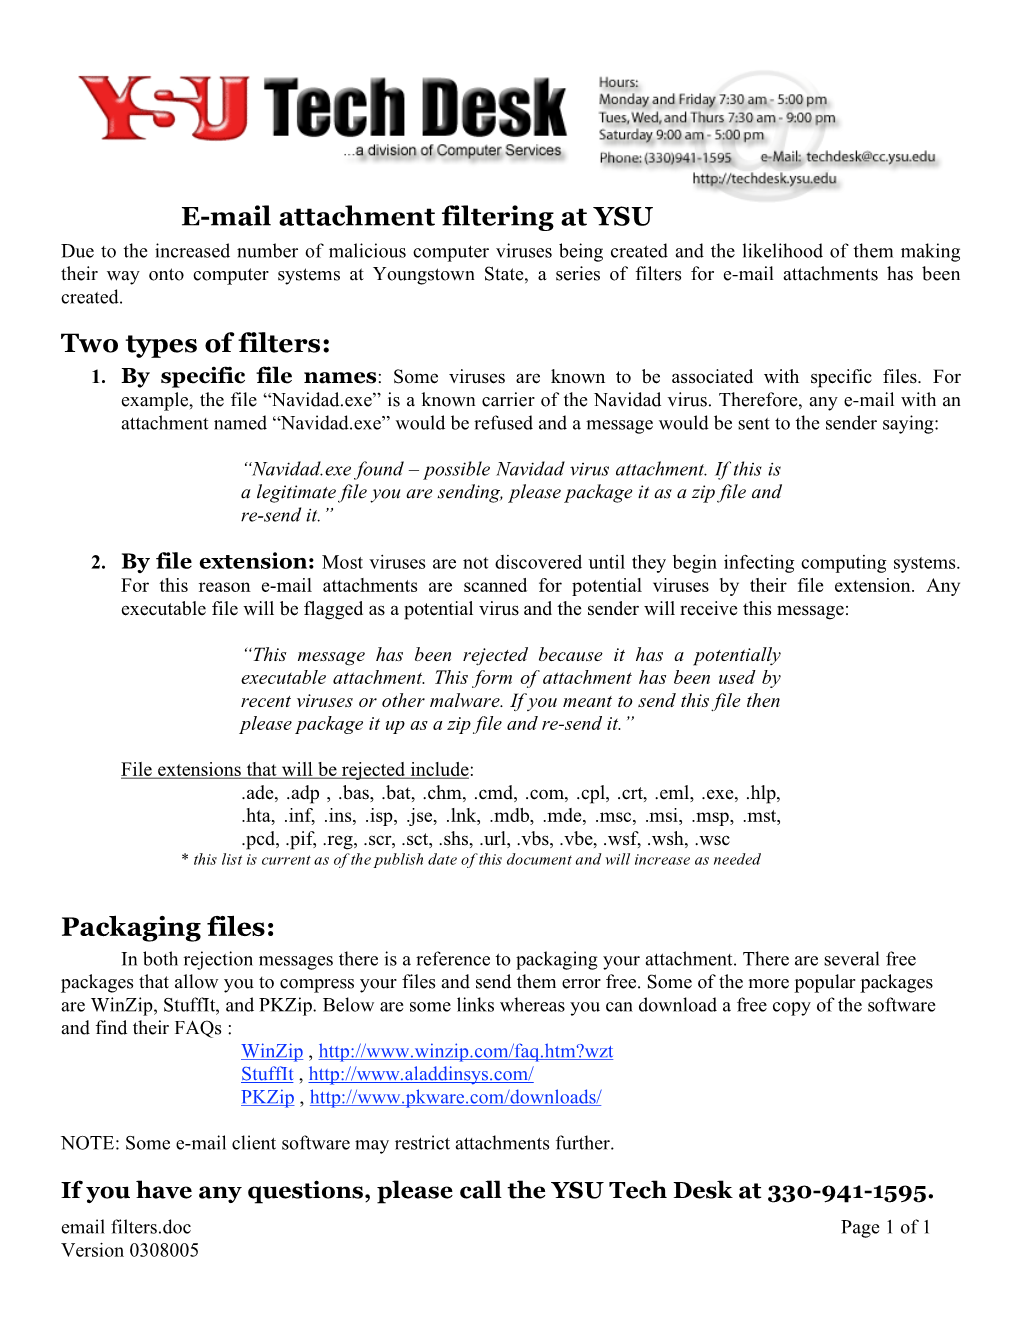 Packaging Files: E-Mail Attachment Filtering At